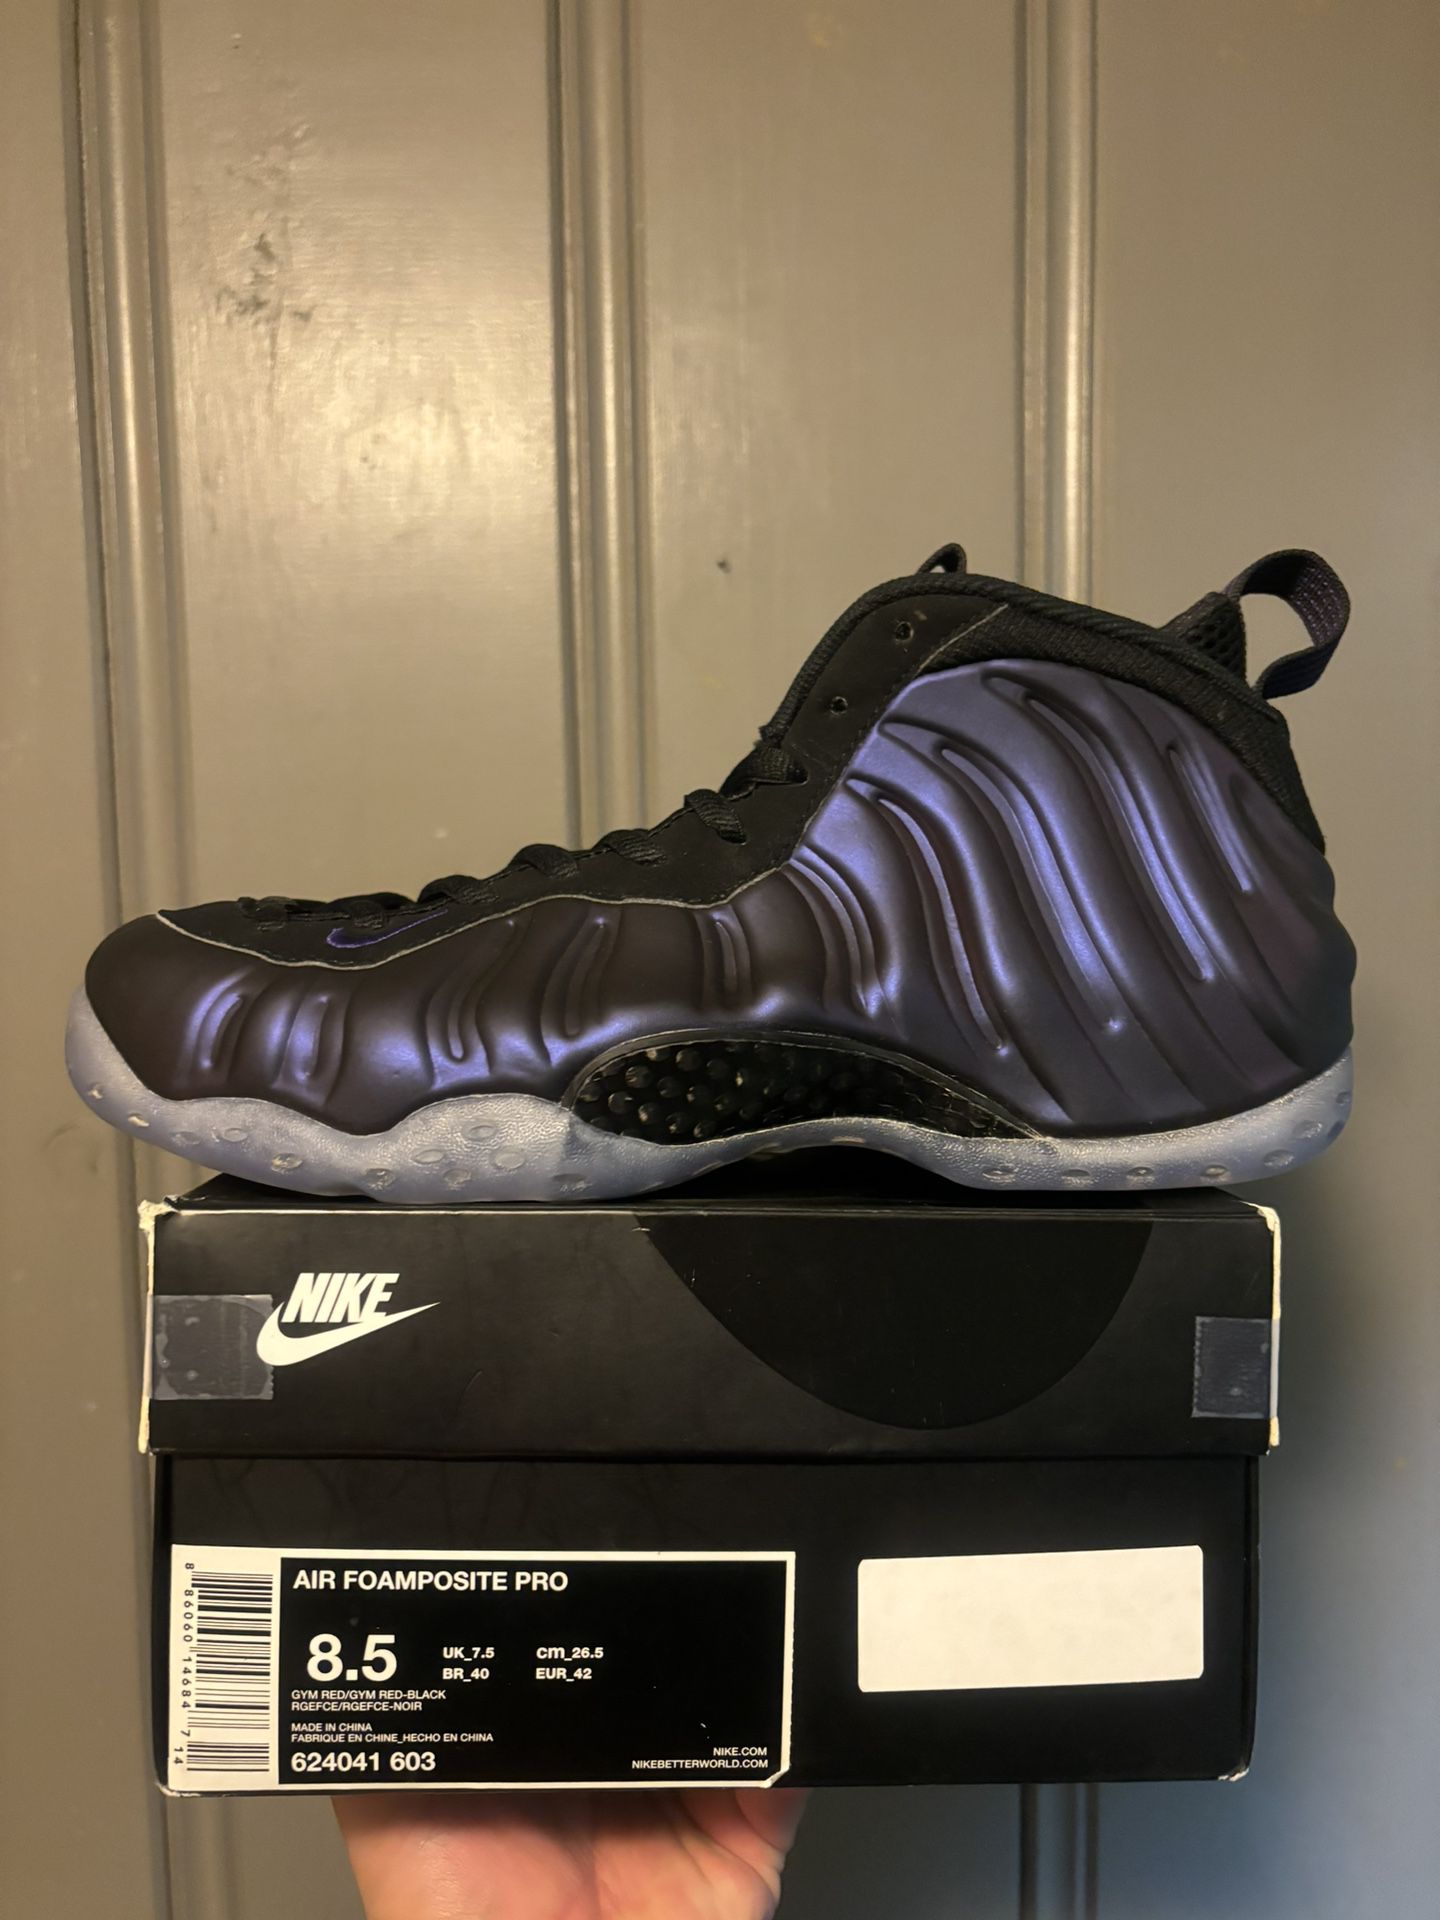 Nike Foamposite One “Eggplant” Size(8M). Worn. In Excellent Condition. Comes With Replacement Foam Box. $150. Cash. Trades Always Welcome. 